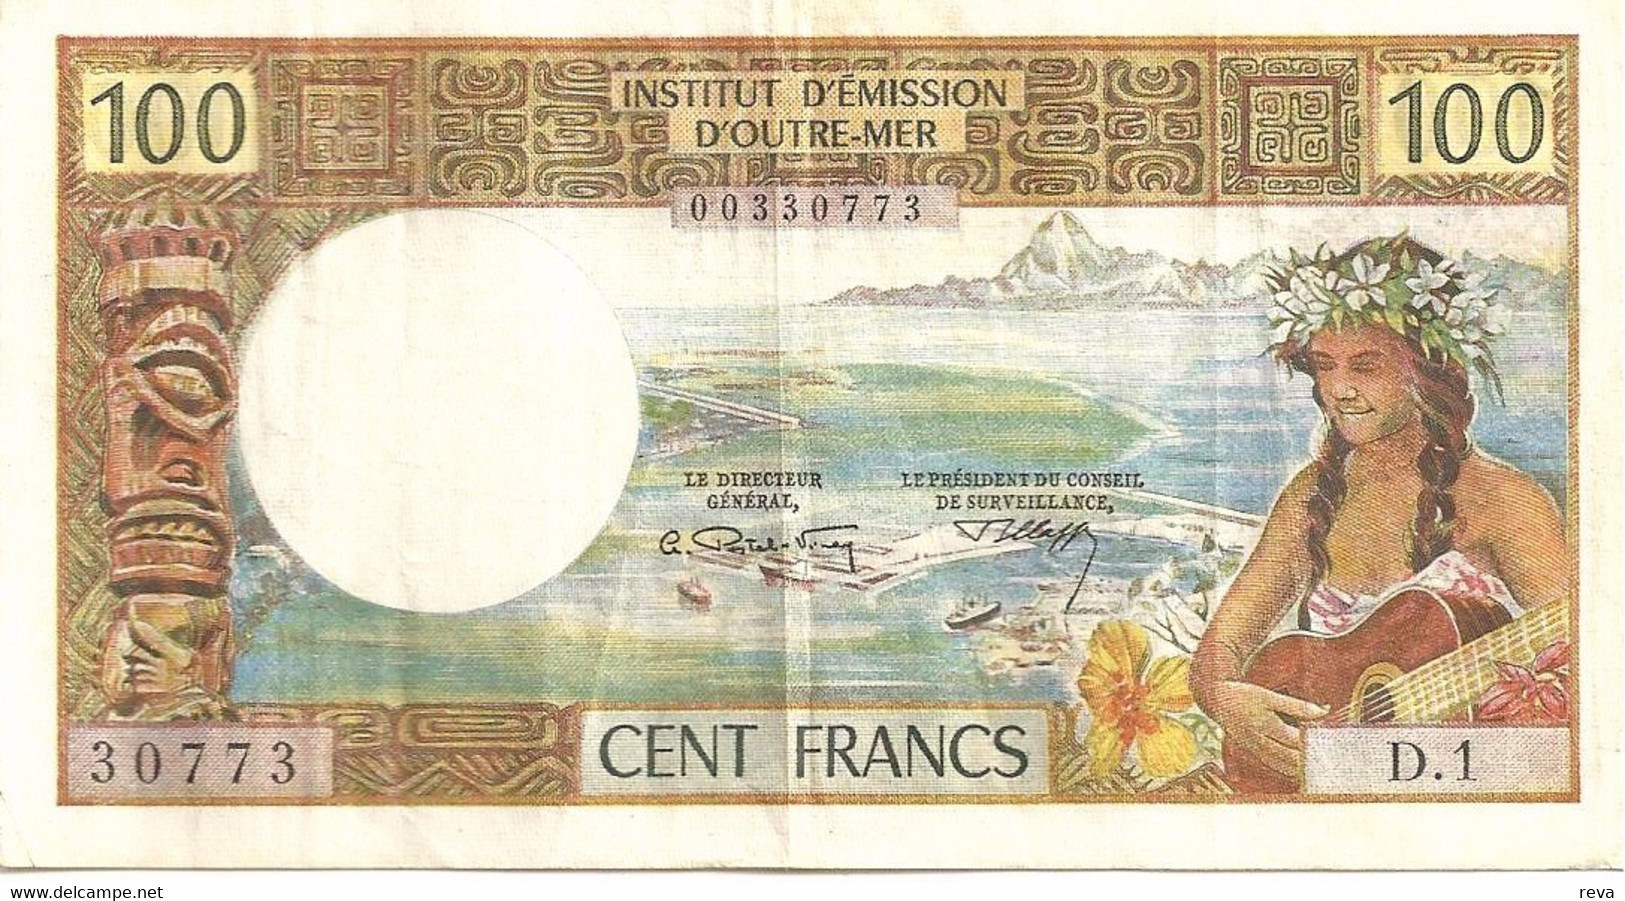 FRENCH POLYNESIA 100 FRANCS BROWN WOMAN FRONT WOMAN HEAD BACK NOT DATED(1971) P24b SIG VARIETY F READ DESCRIPTION!! - Papeete (French Polynesia 1914-1985)